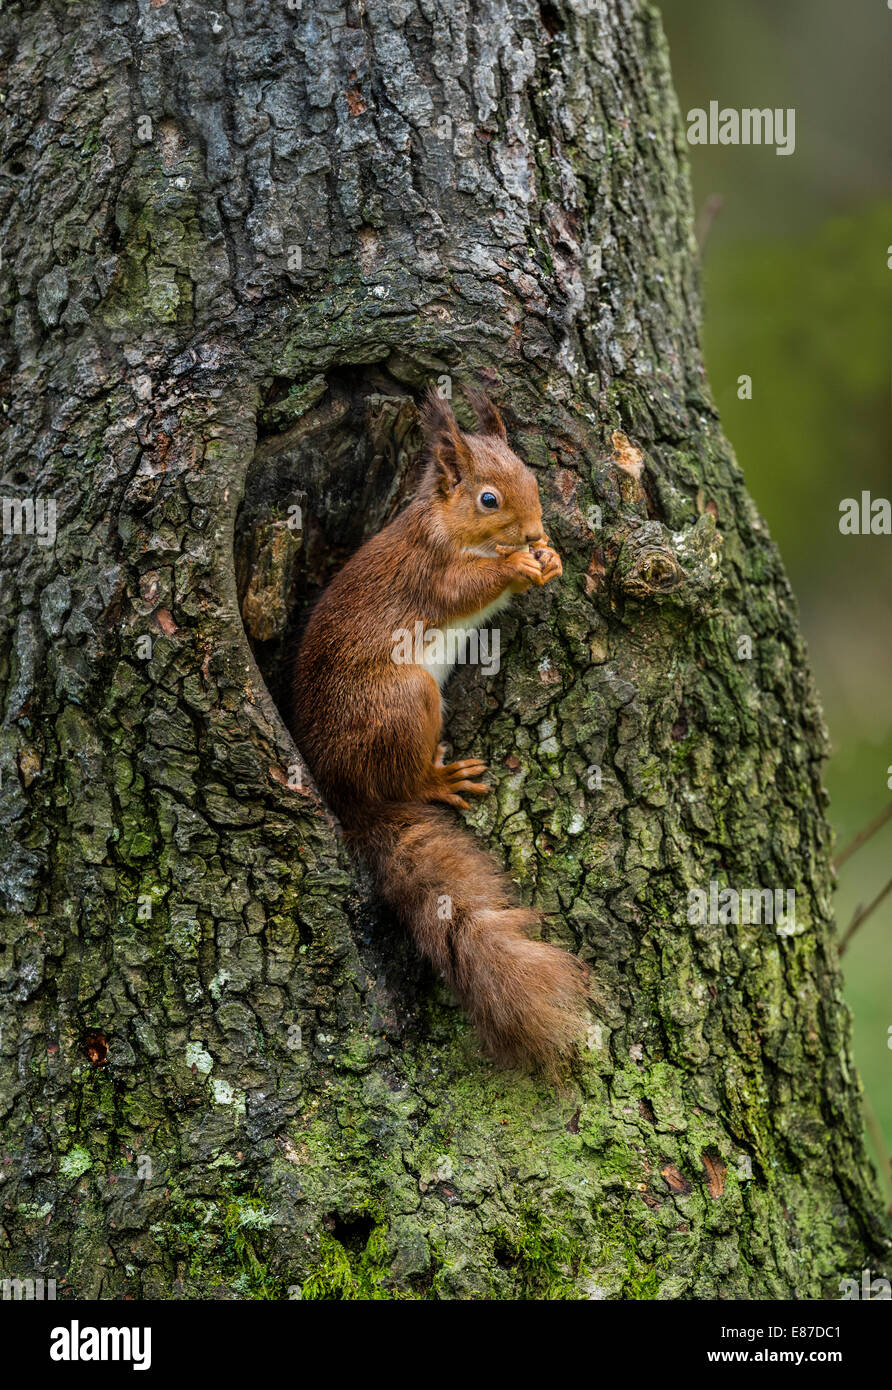 Red Squirrel sitting in a hole in a tree nibbling on a nut Stock Photo